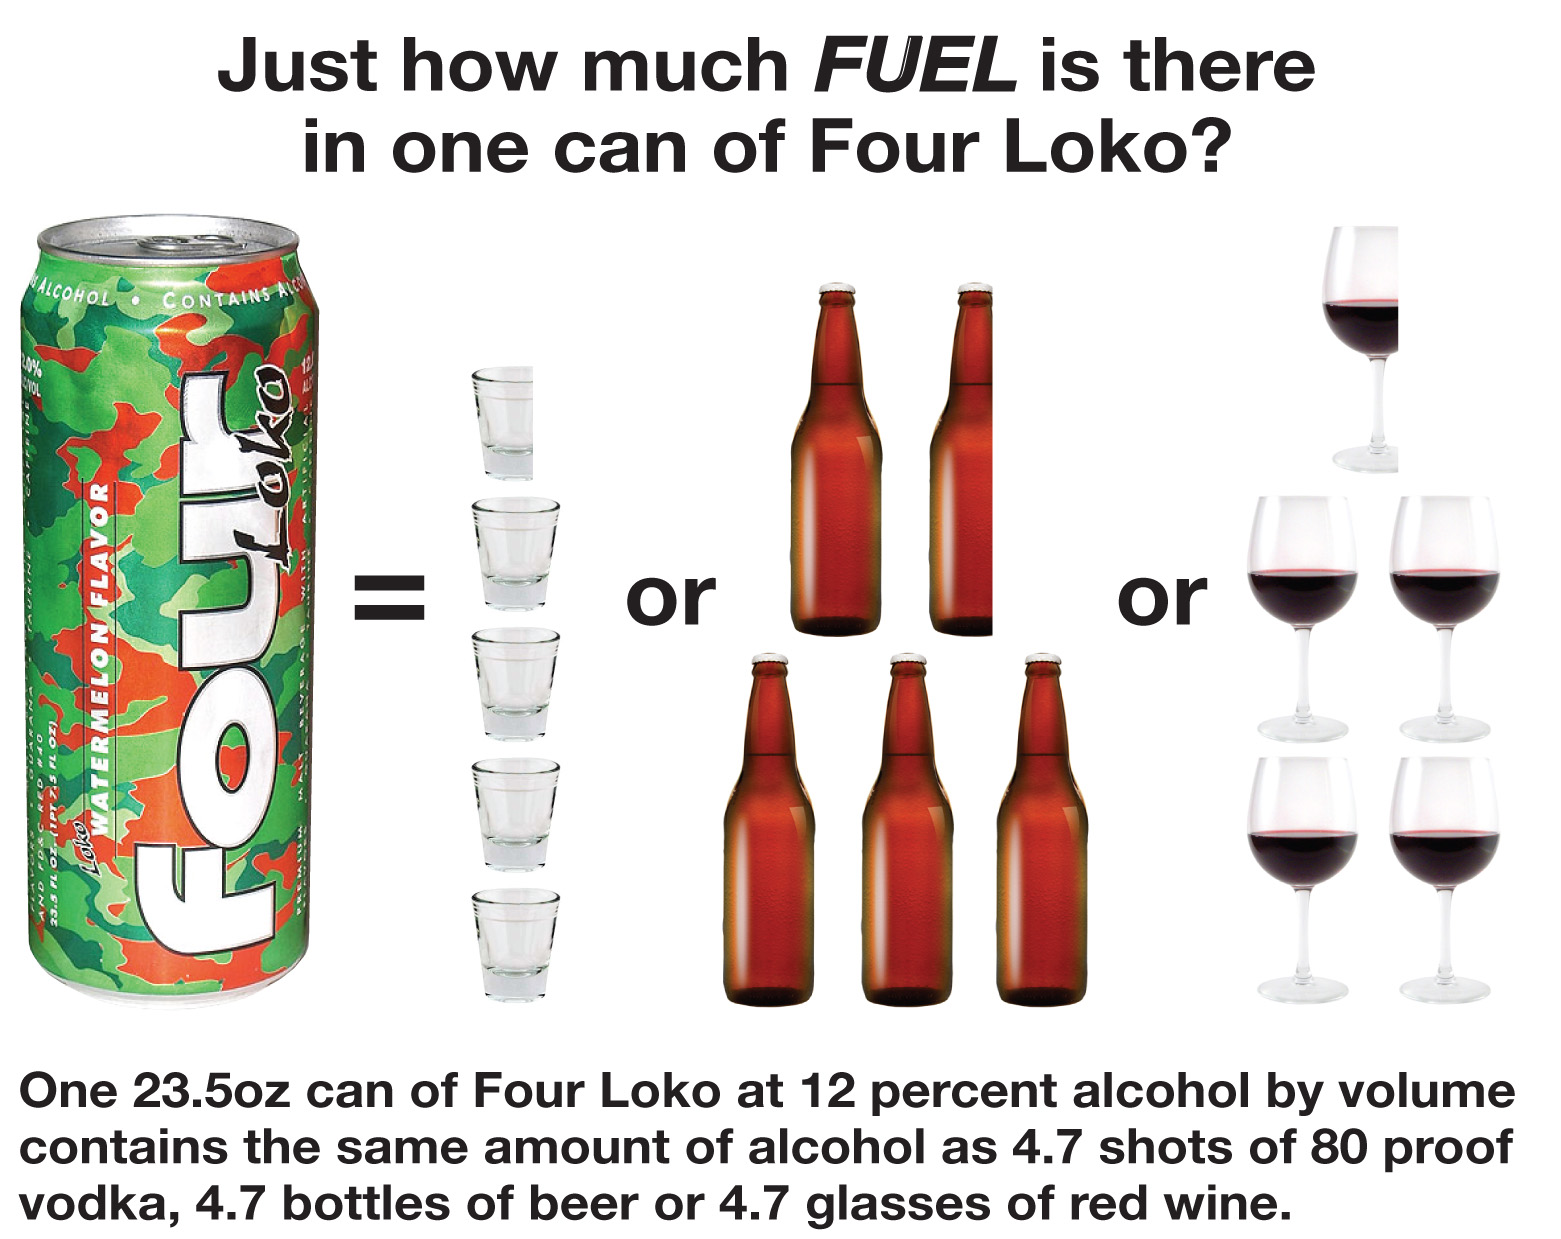 The FTC says Phusion Projects falsely claimed that a 23.5-ounce can of Four Loko, at 11 or 12 percent alcohol, had the same amount of alcohol as one or two typical 12-ounce beers and a consumer could drink a whole Four Loko safely in its entirety on a single occasion.